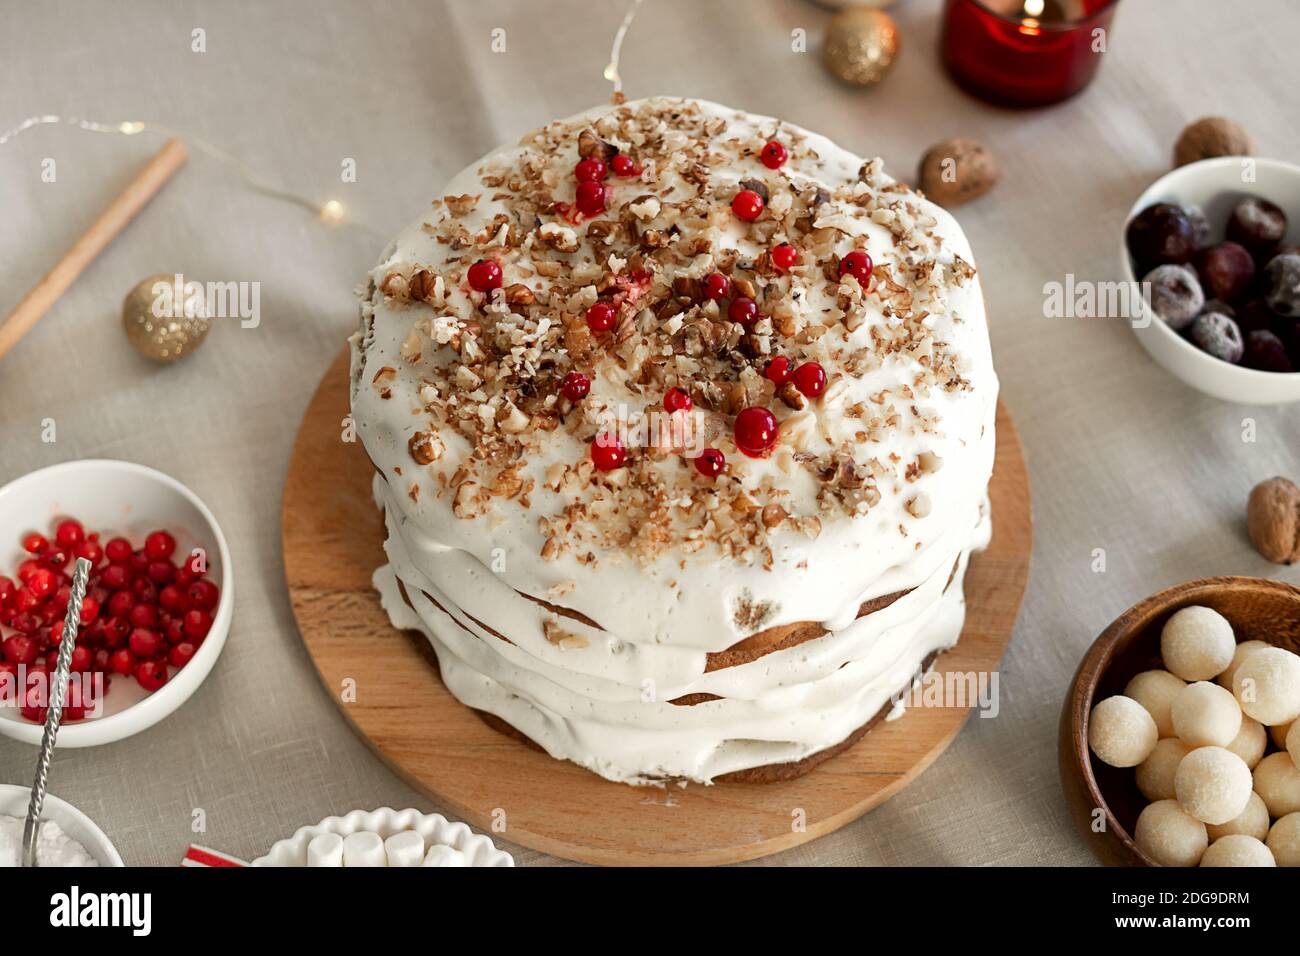 Preparing food for Christmas dinner. Homemade Christmas cake with white icing sugar, nuts and red cranberries Stock Photo